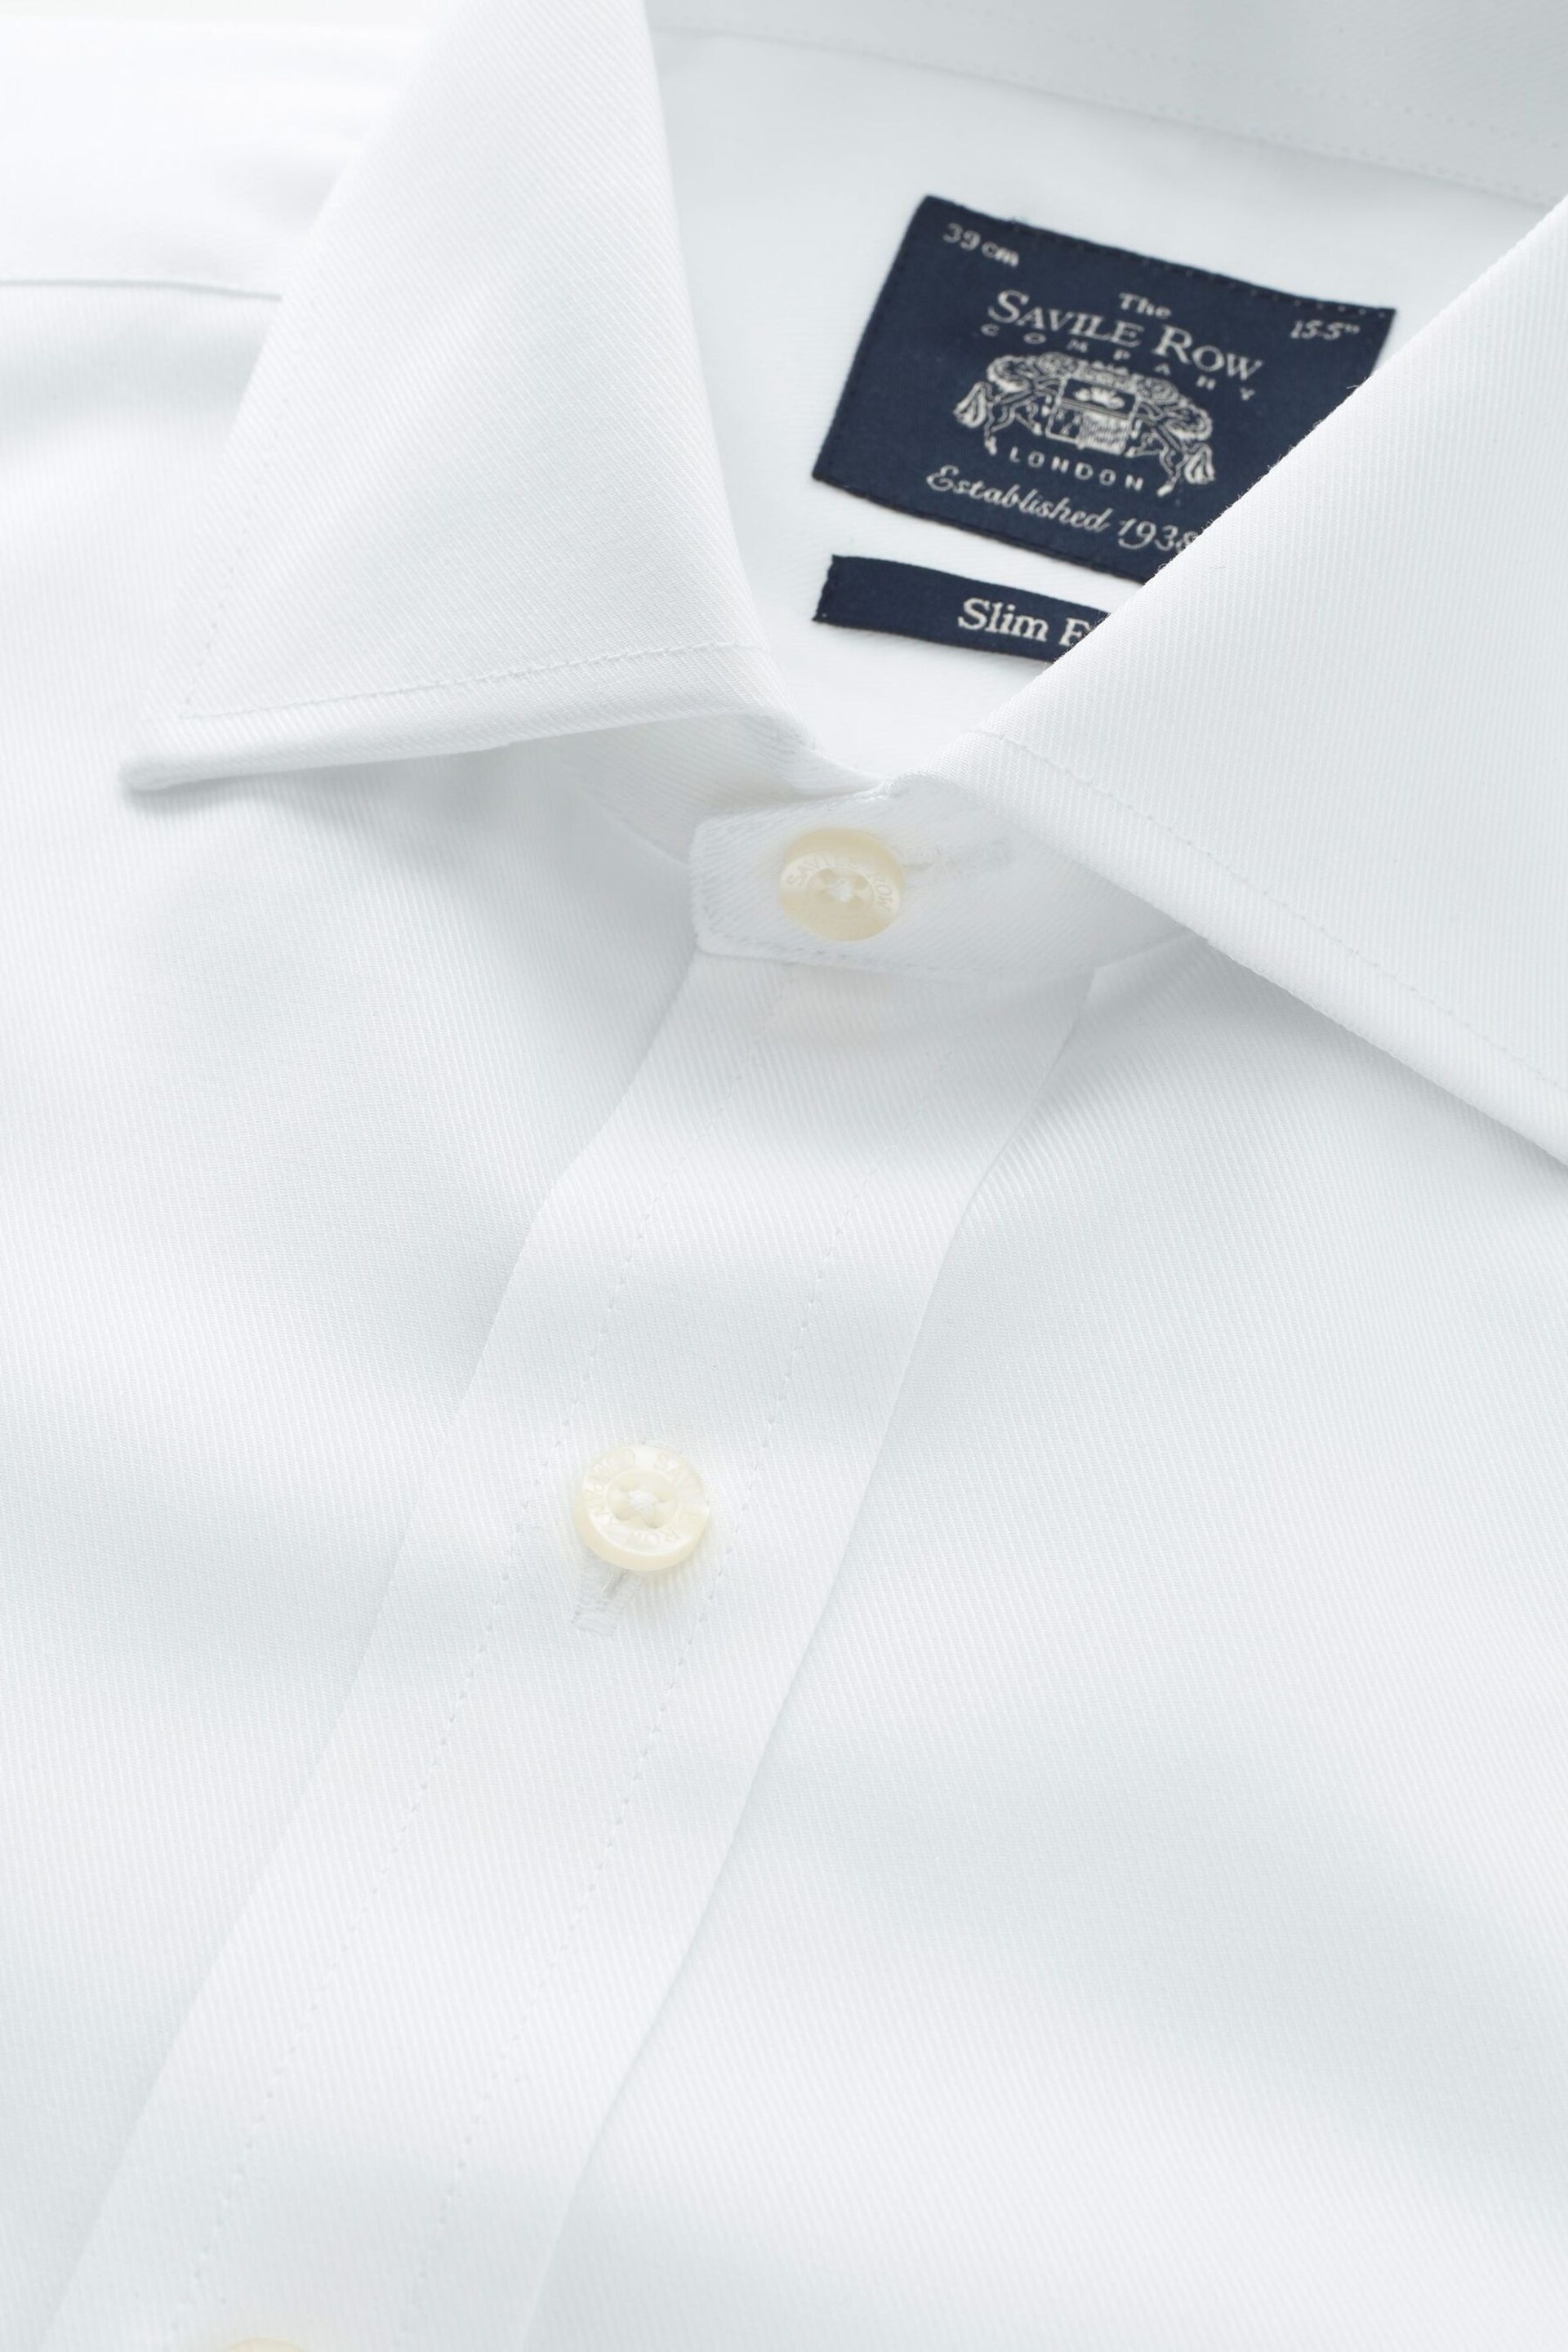 Savile Row Co White Fine Twill Slim Fit Double Cuff Shirt - Image 4 of 5